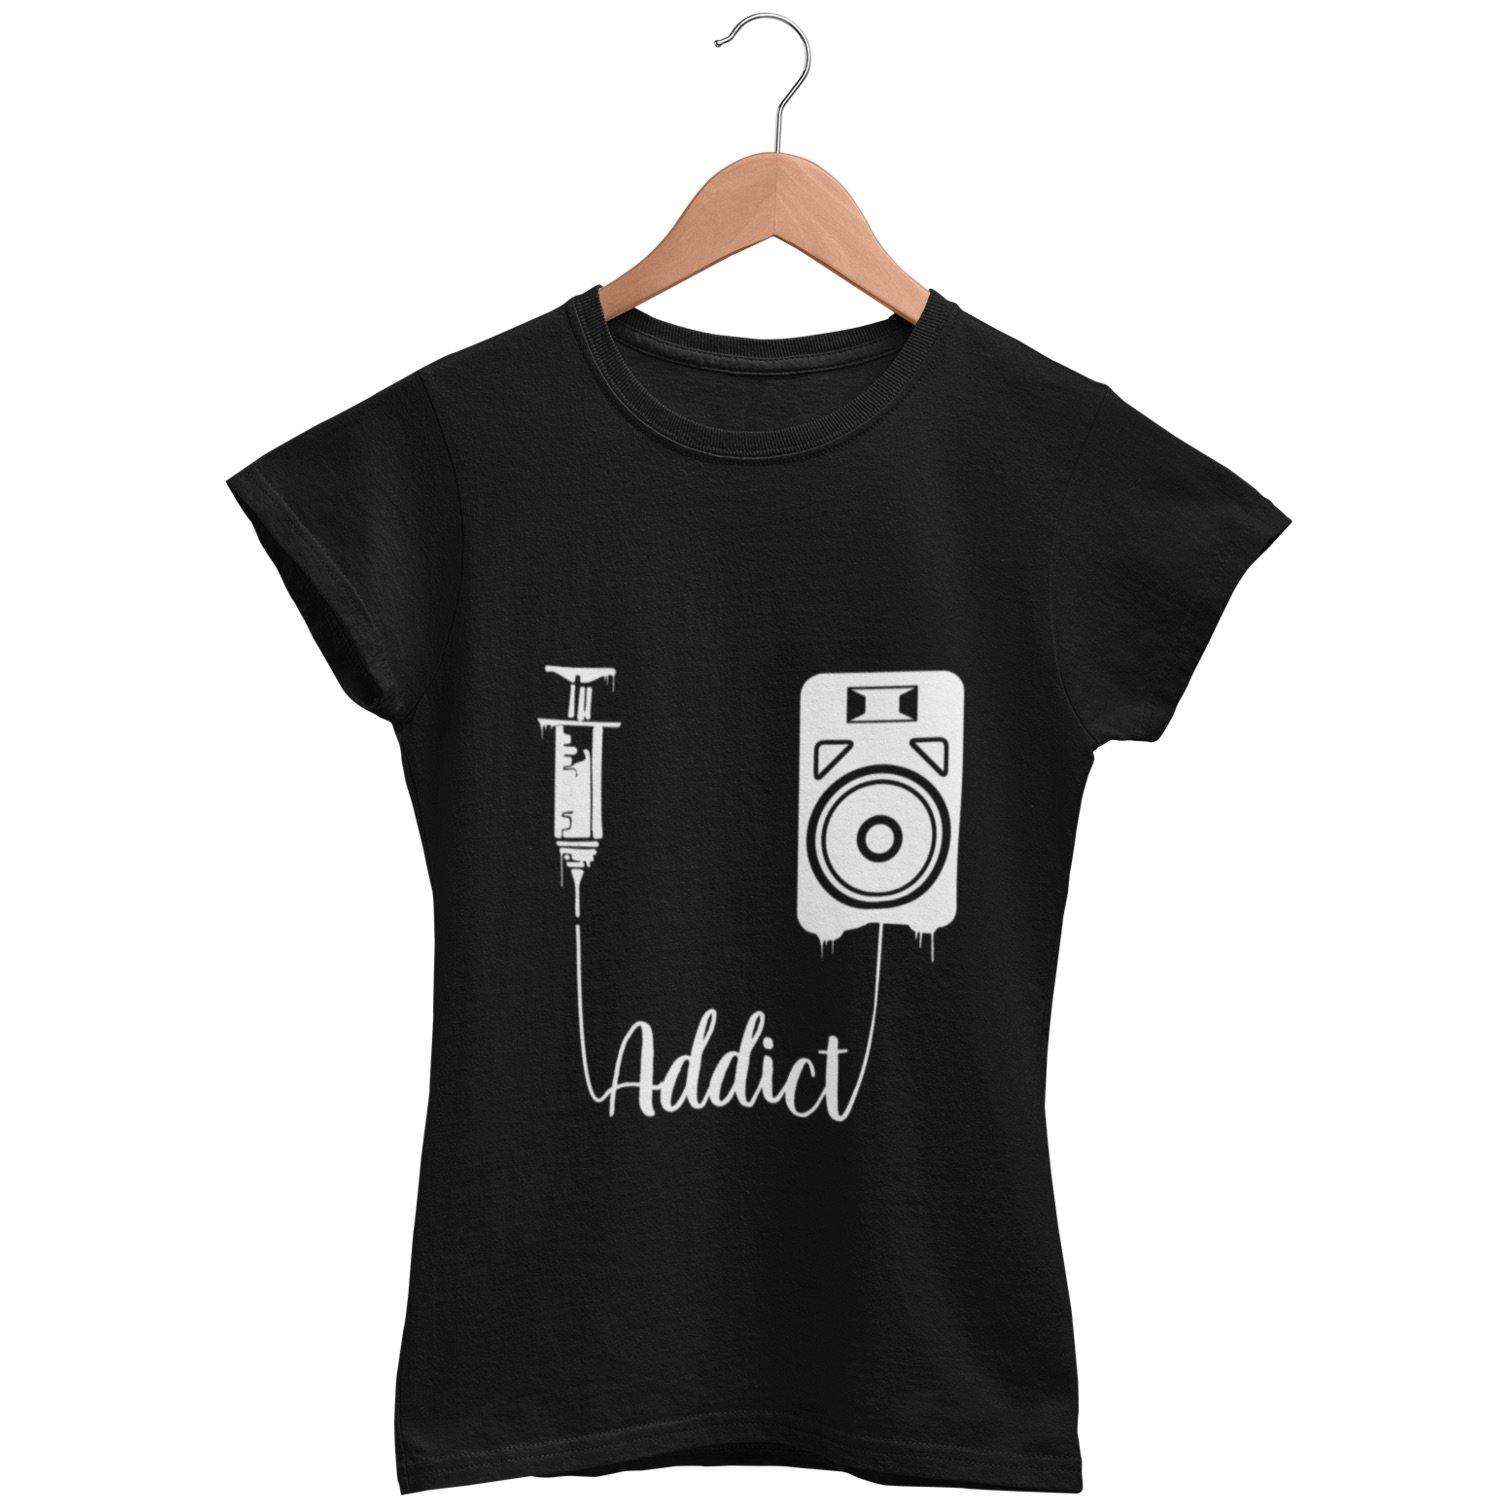 Techno Visual Effect 2 Women's Fitted T-Shirt | Techno Outfit